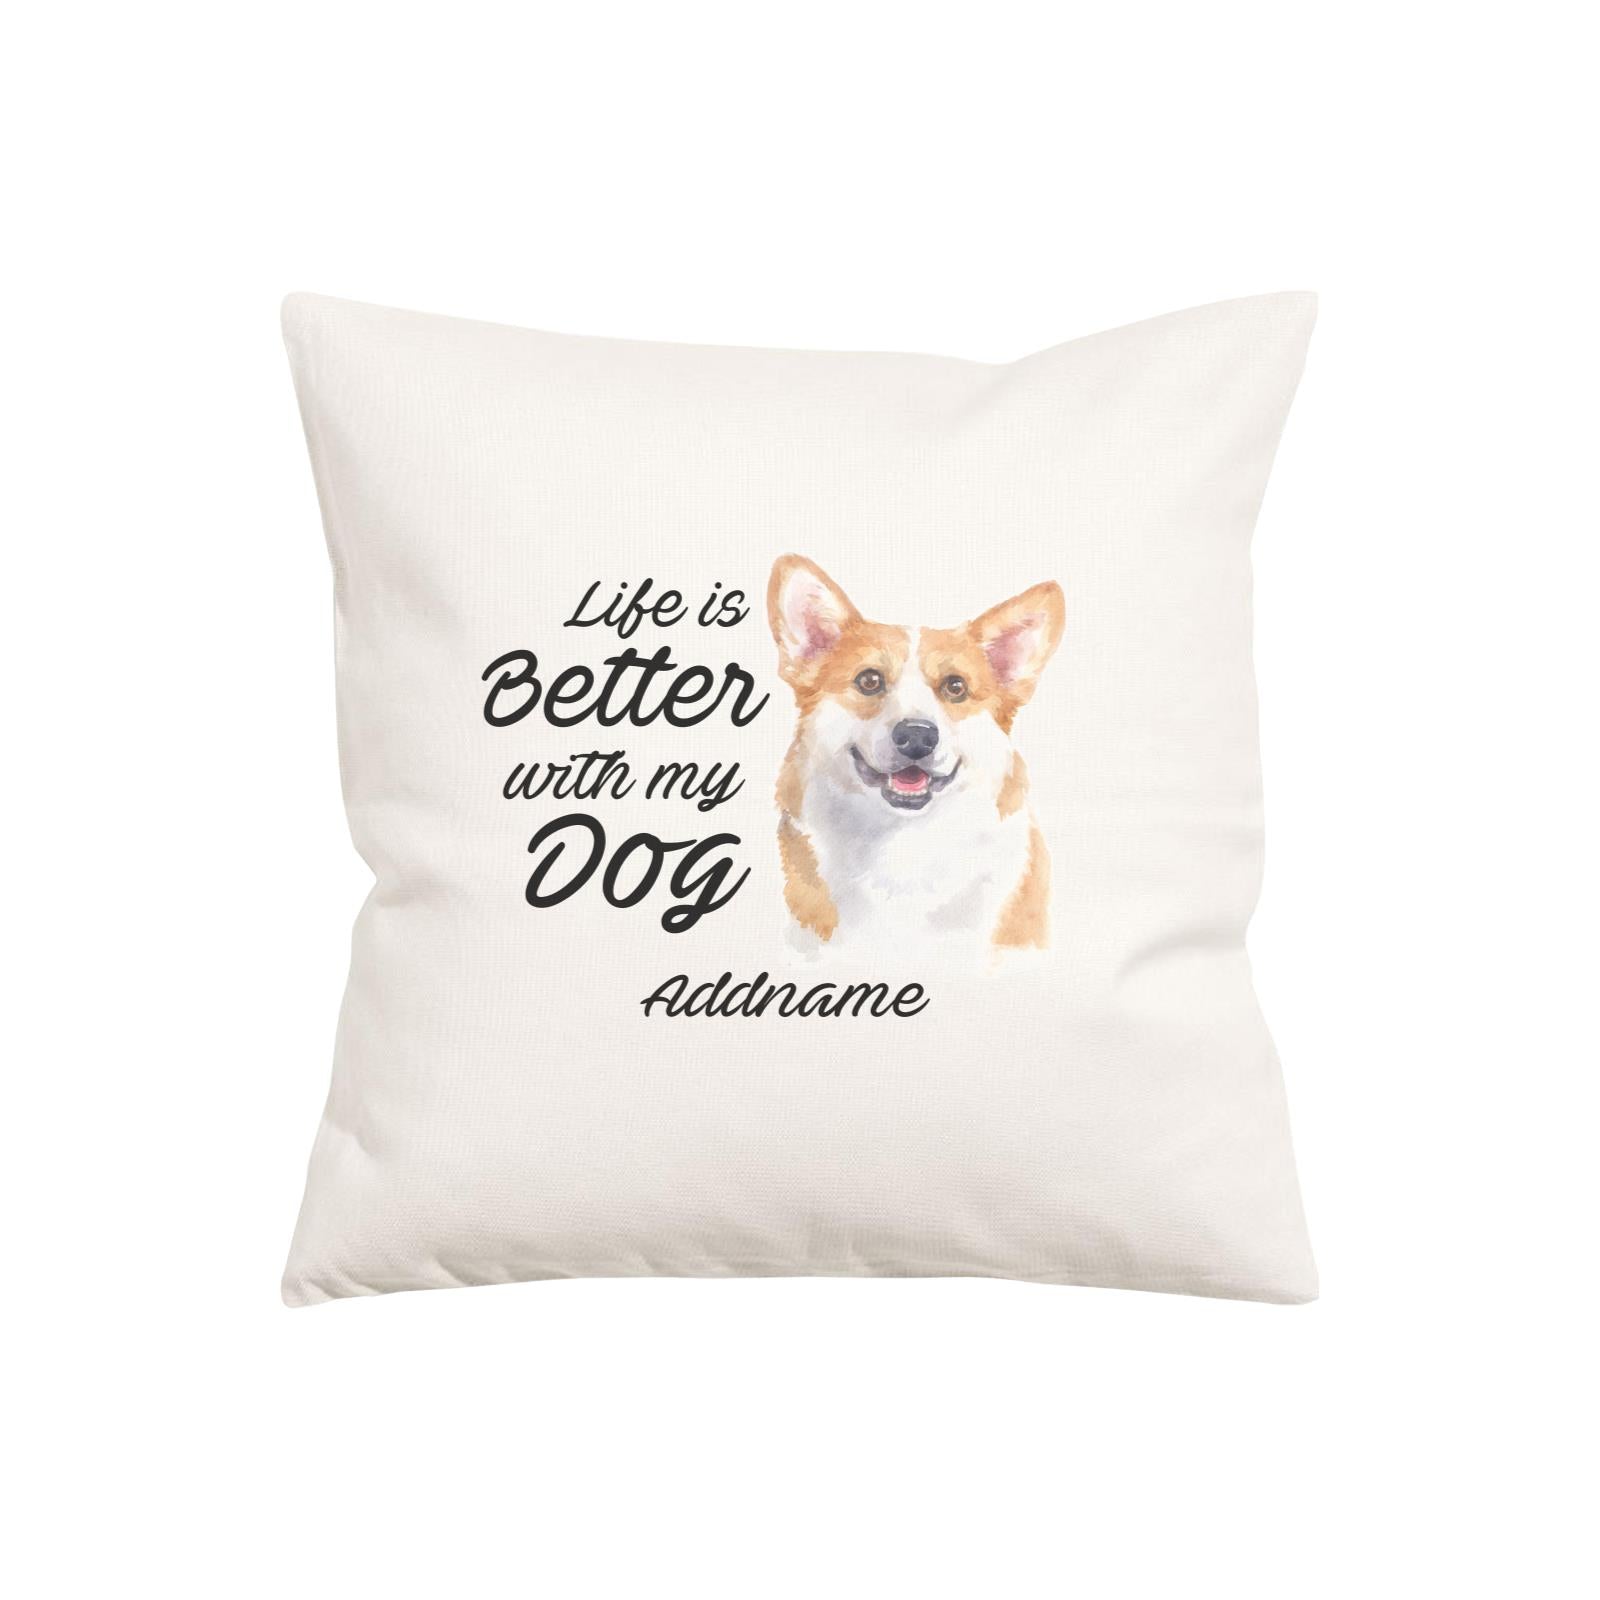 Watercolor Life is Better With My Dog Welsh Corgi Smile Addname Pillow Cushion